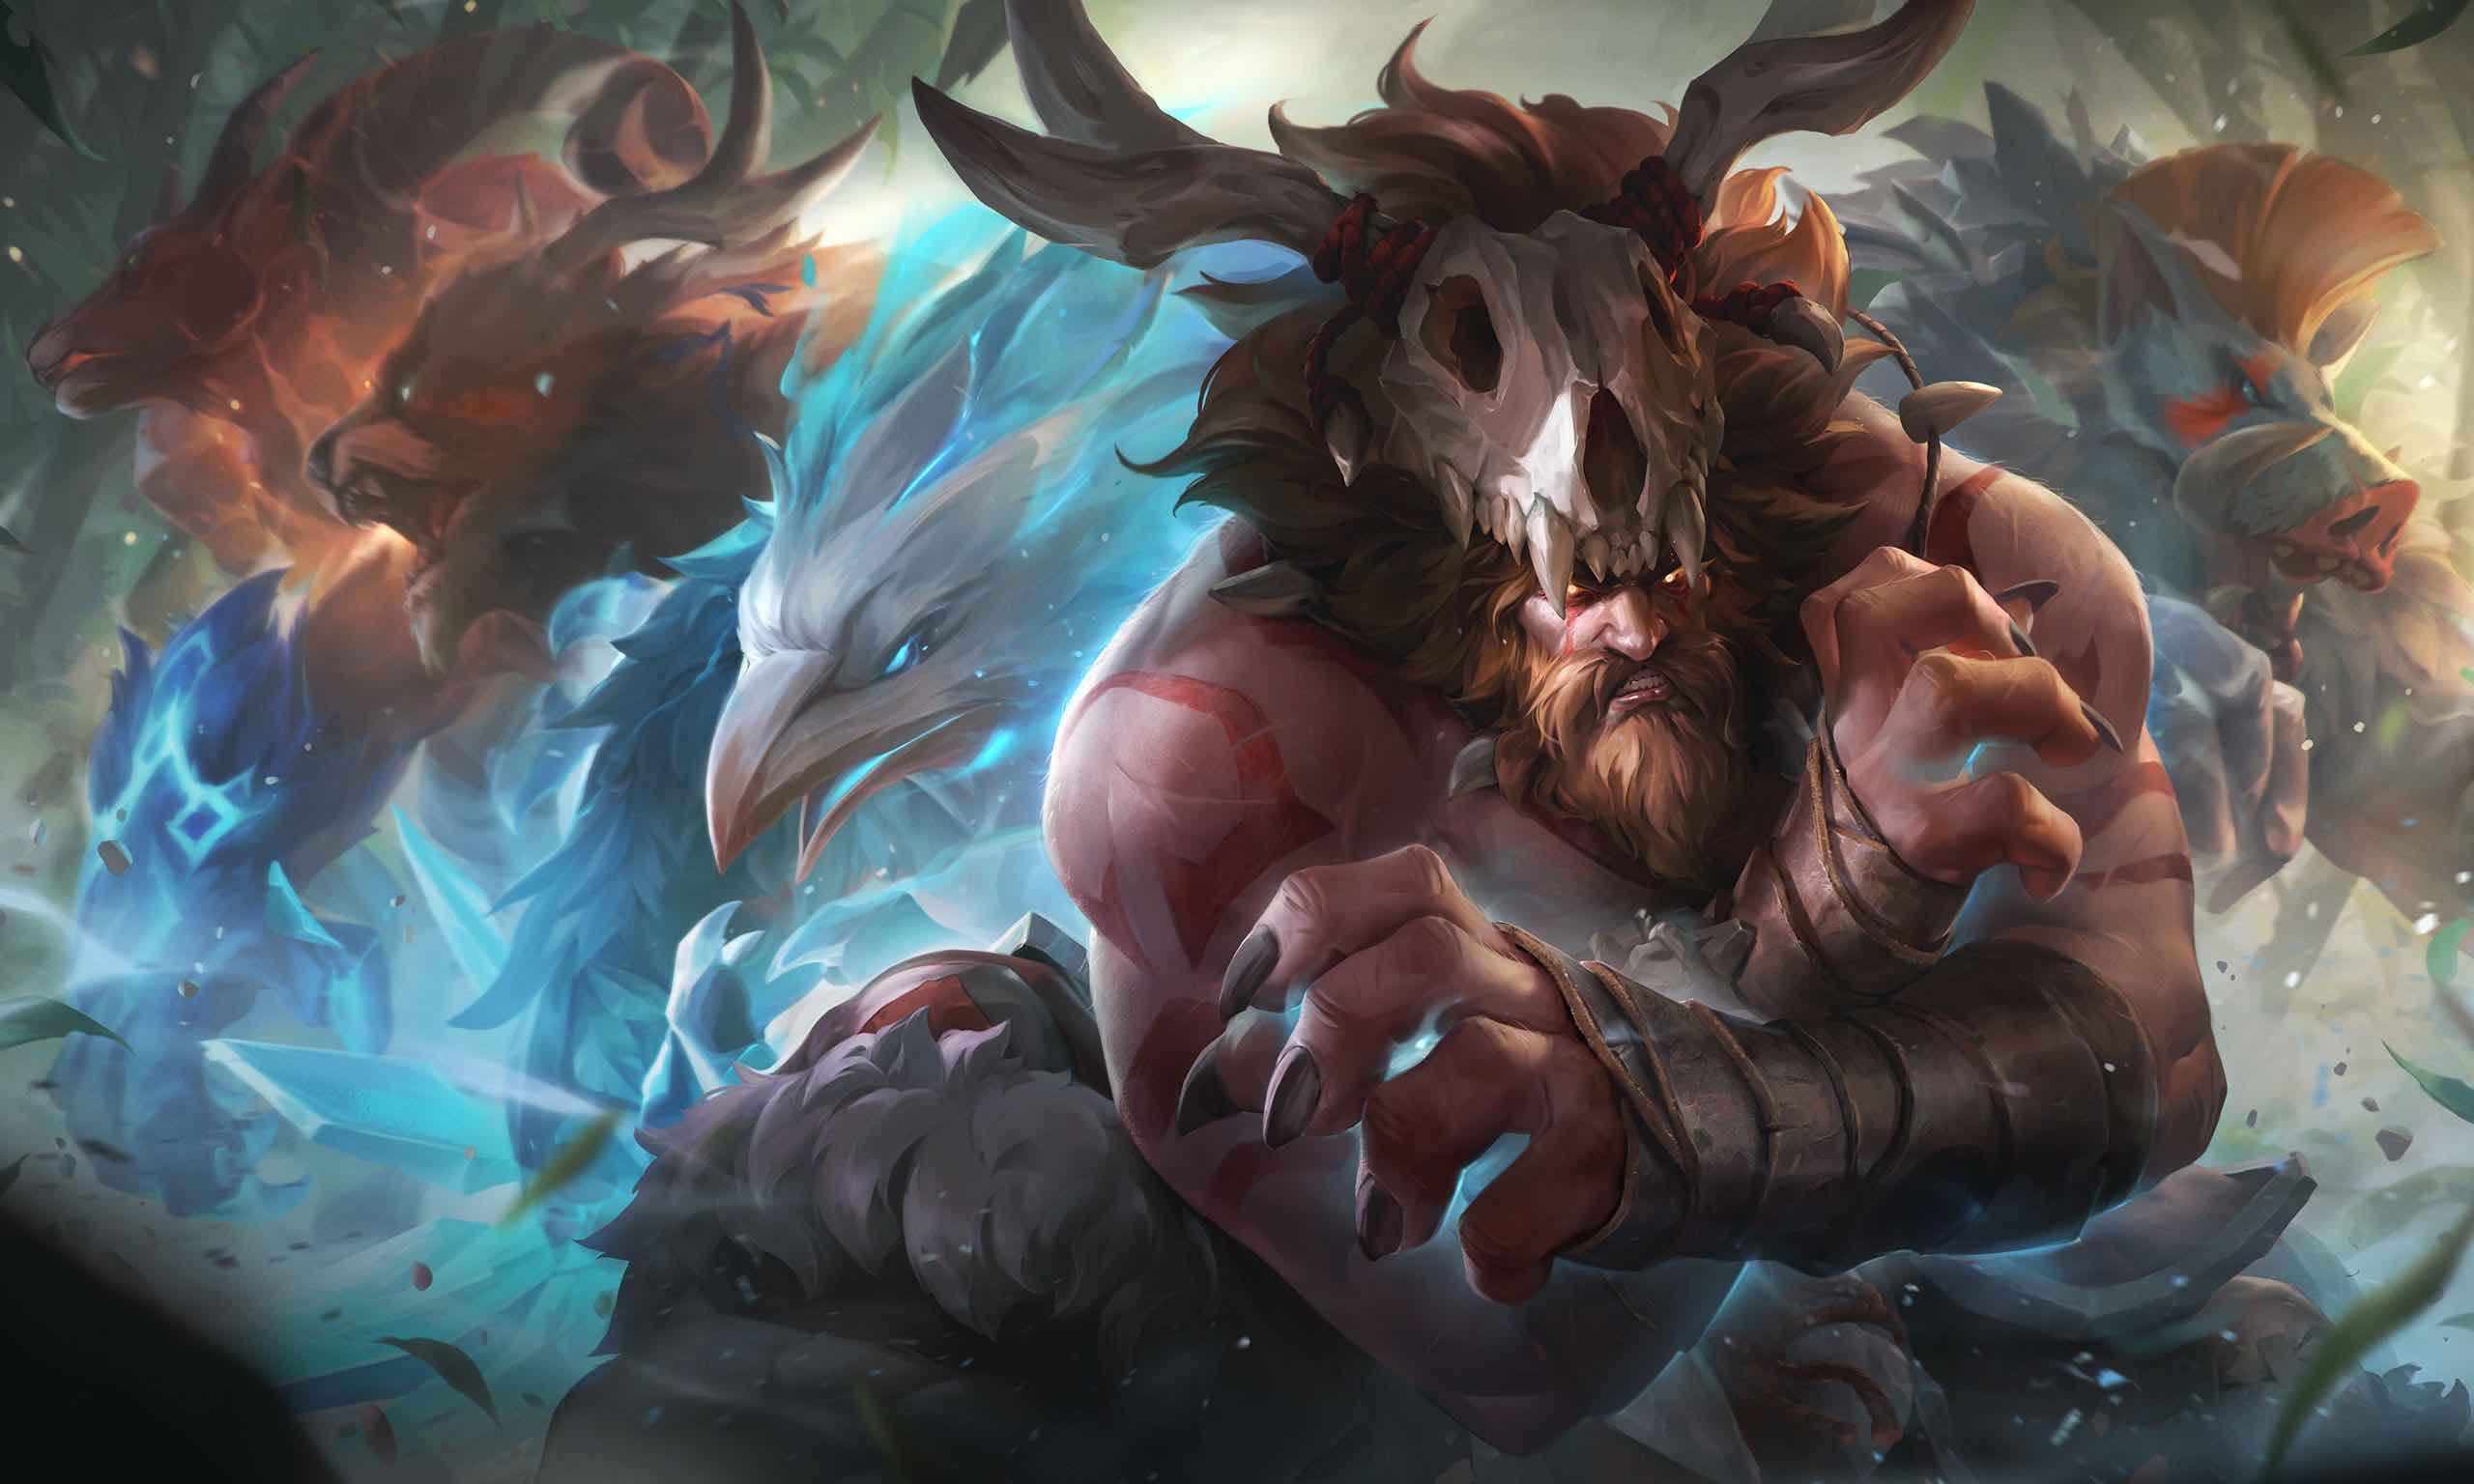 Udyr, the Spirit Walker, will debut in League of Legends version 12.16